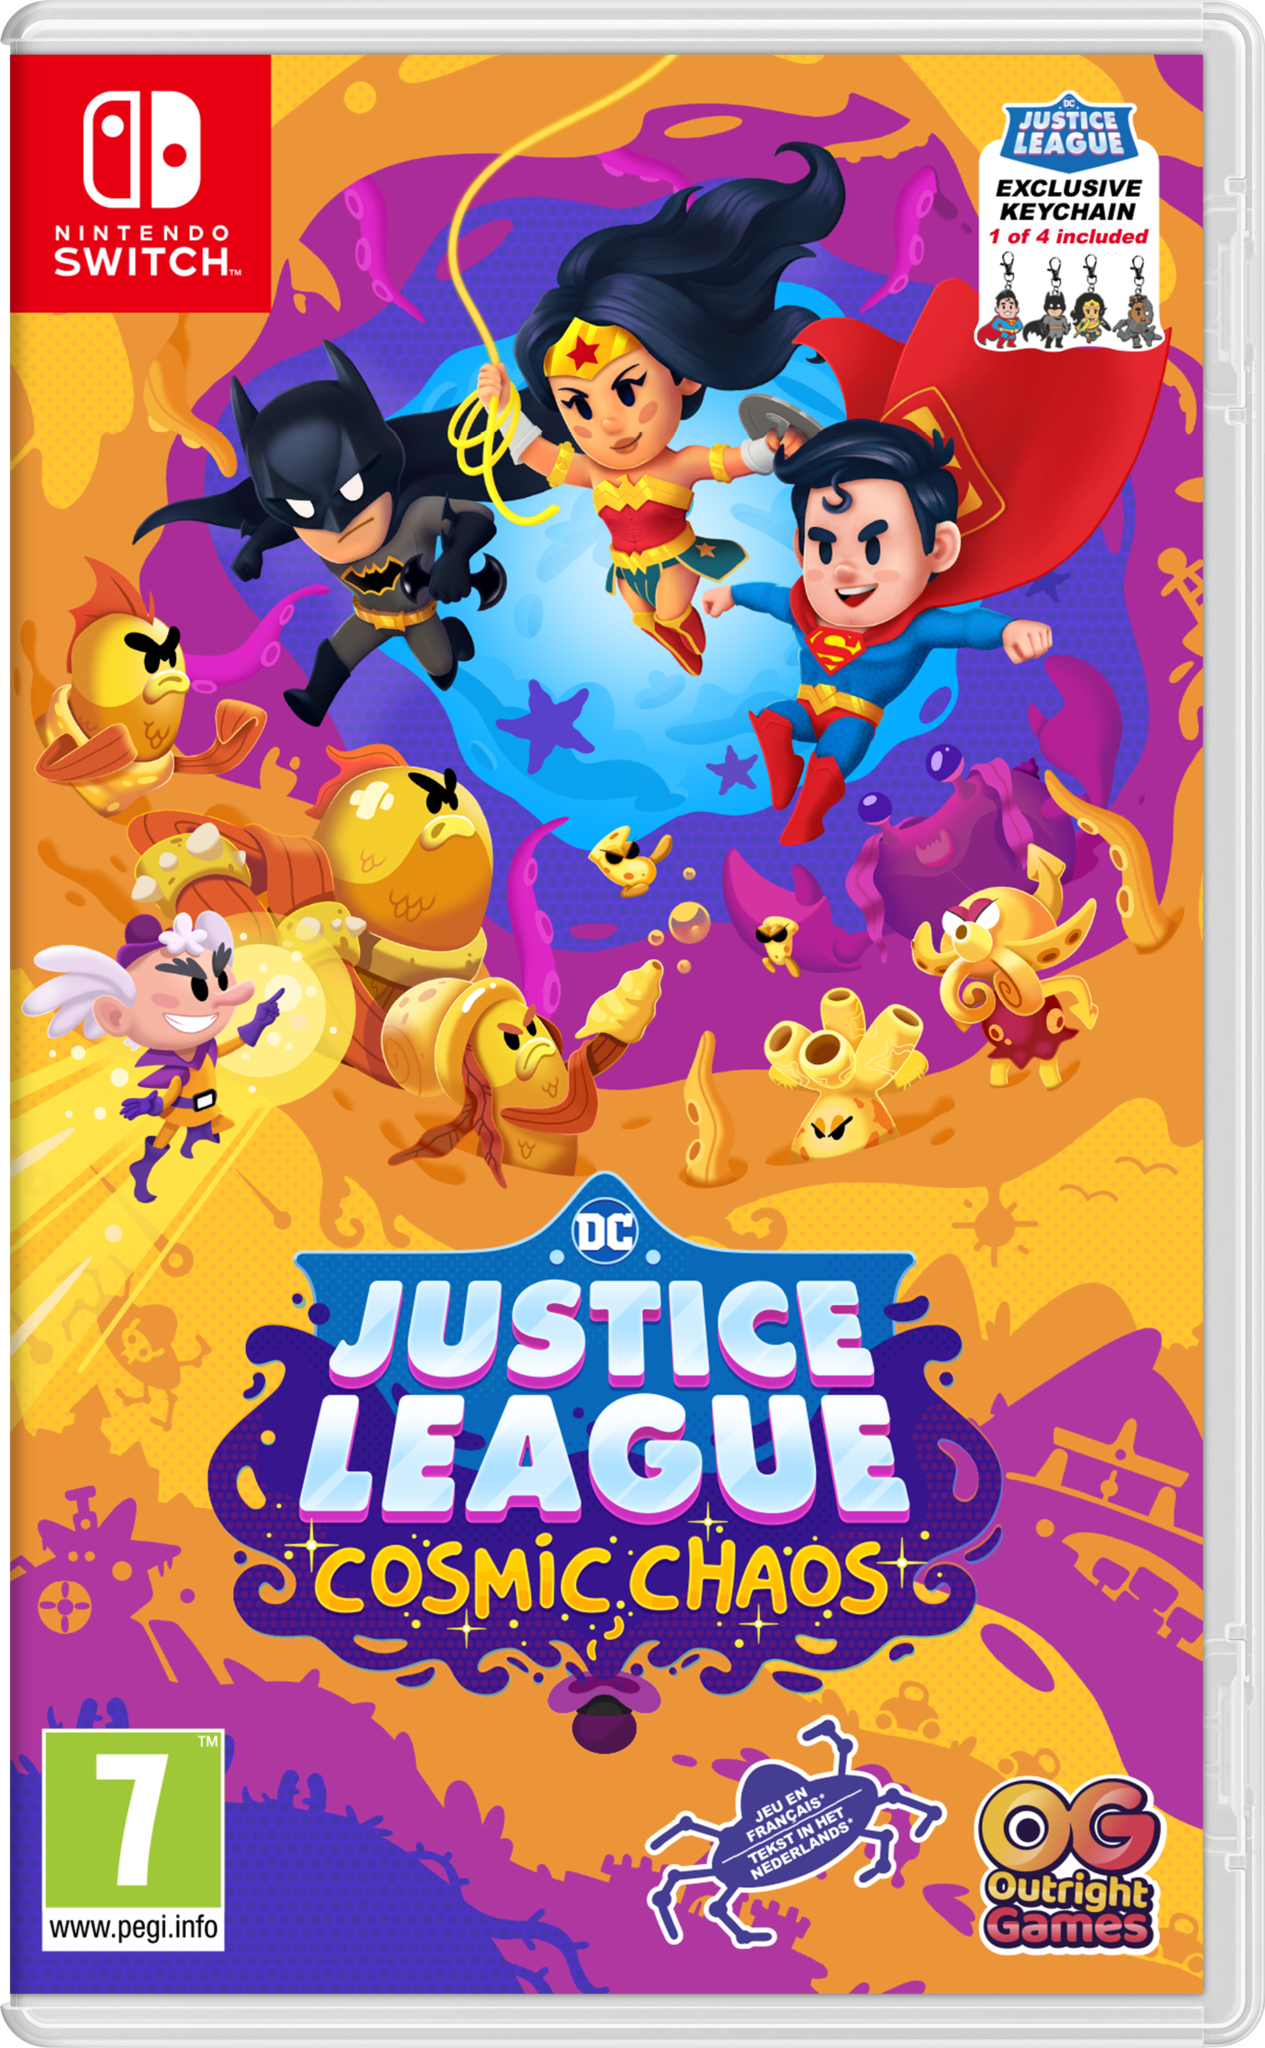 Nintendo Switch DC's Justice League: Cosmic Chaos